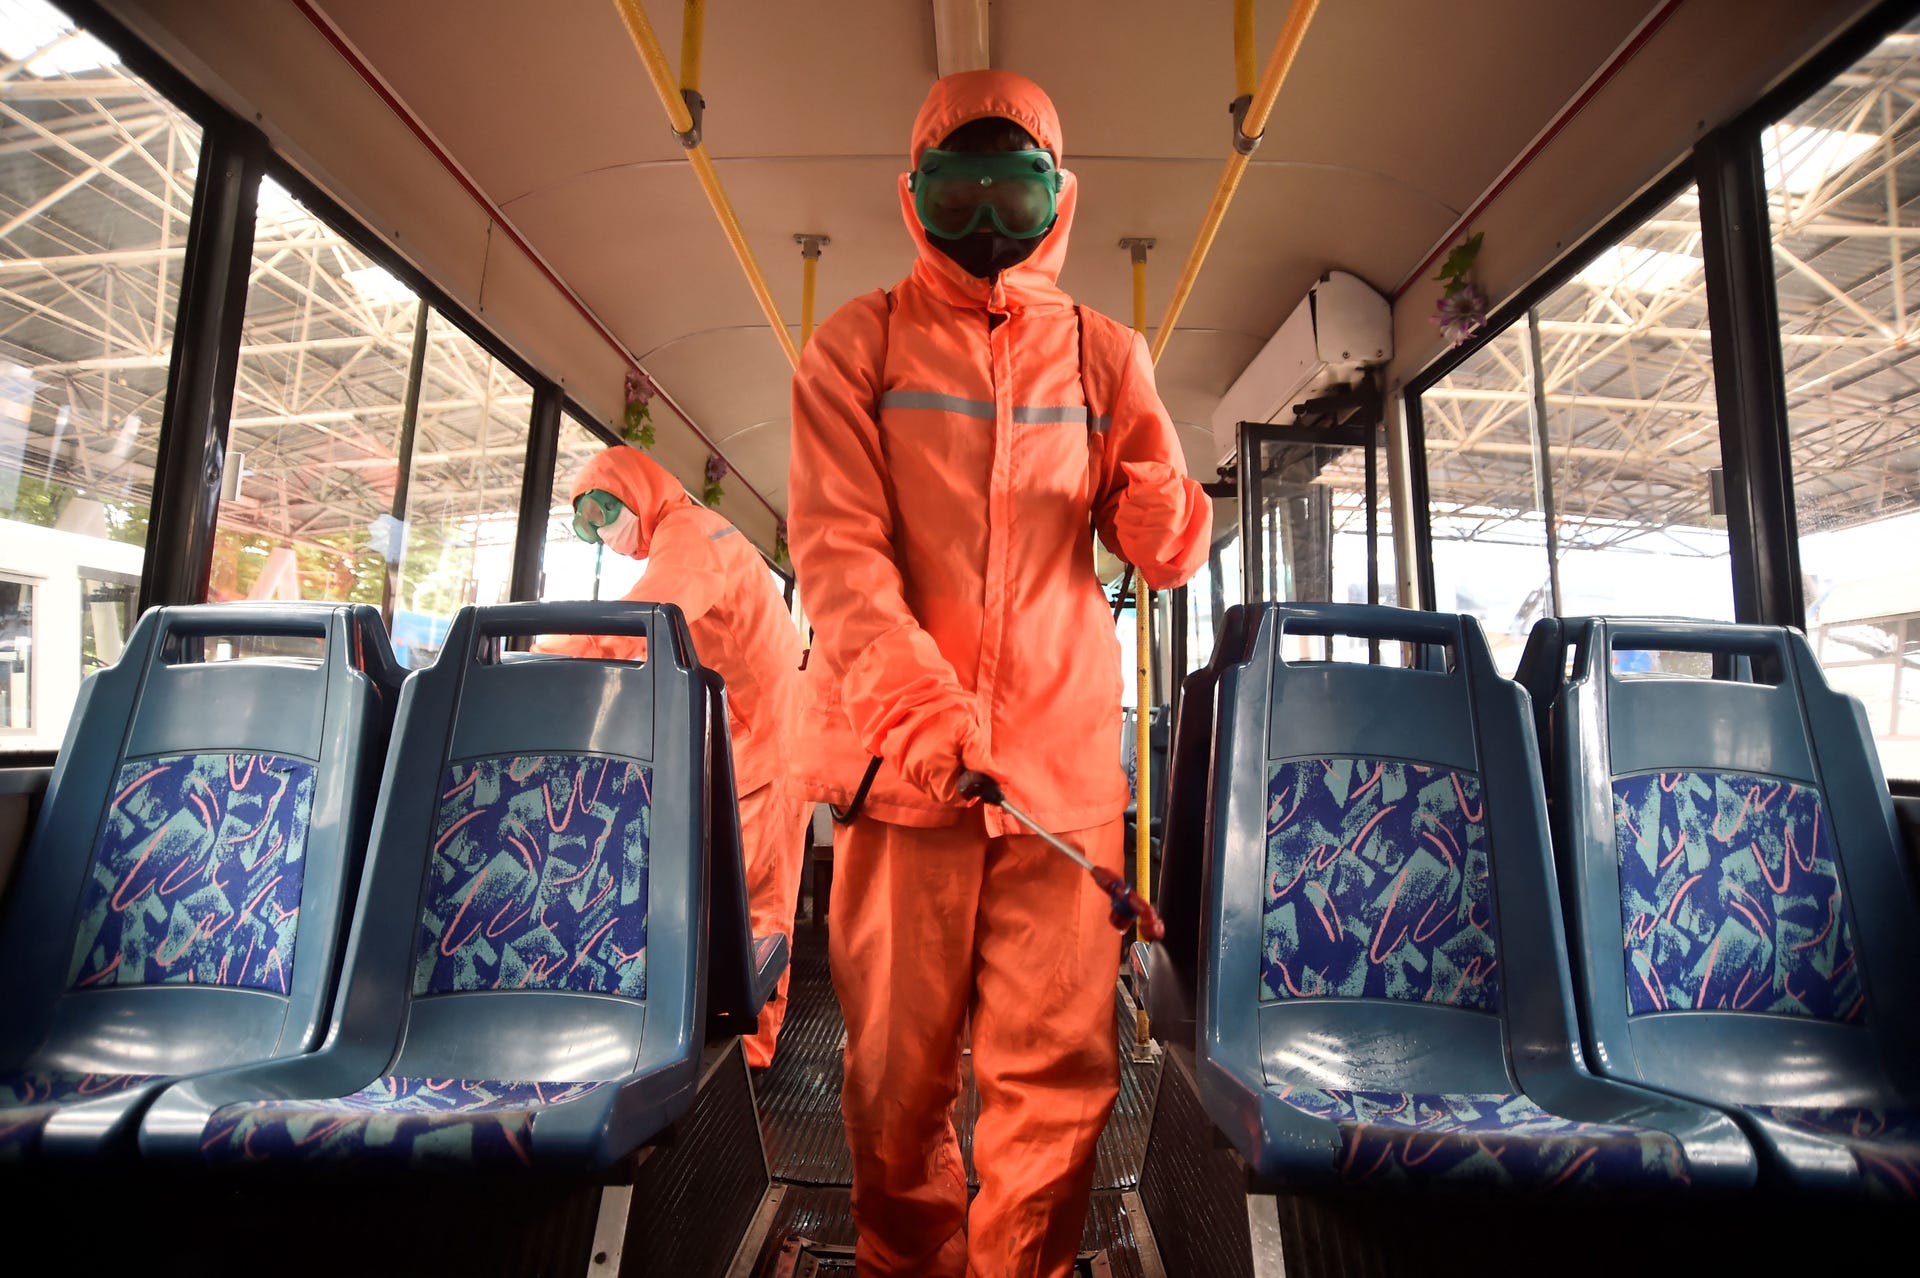 Health officials in protective gear disinfect a trolley bus in Pyongyang, North Korea, in June 2022